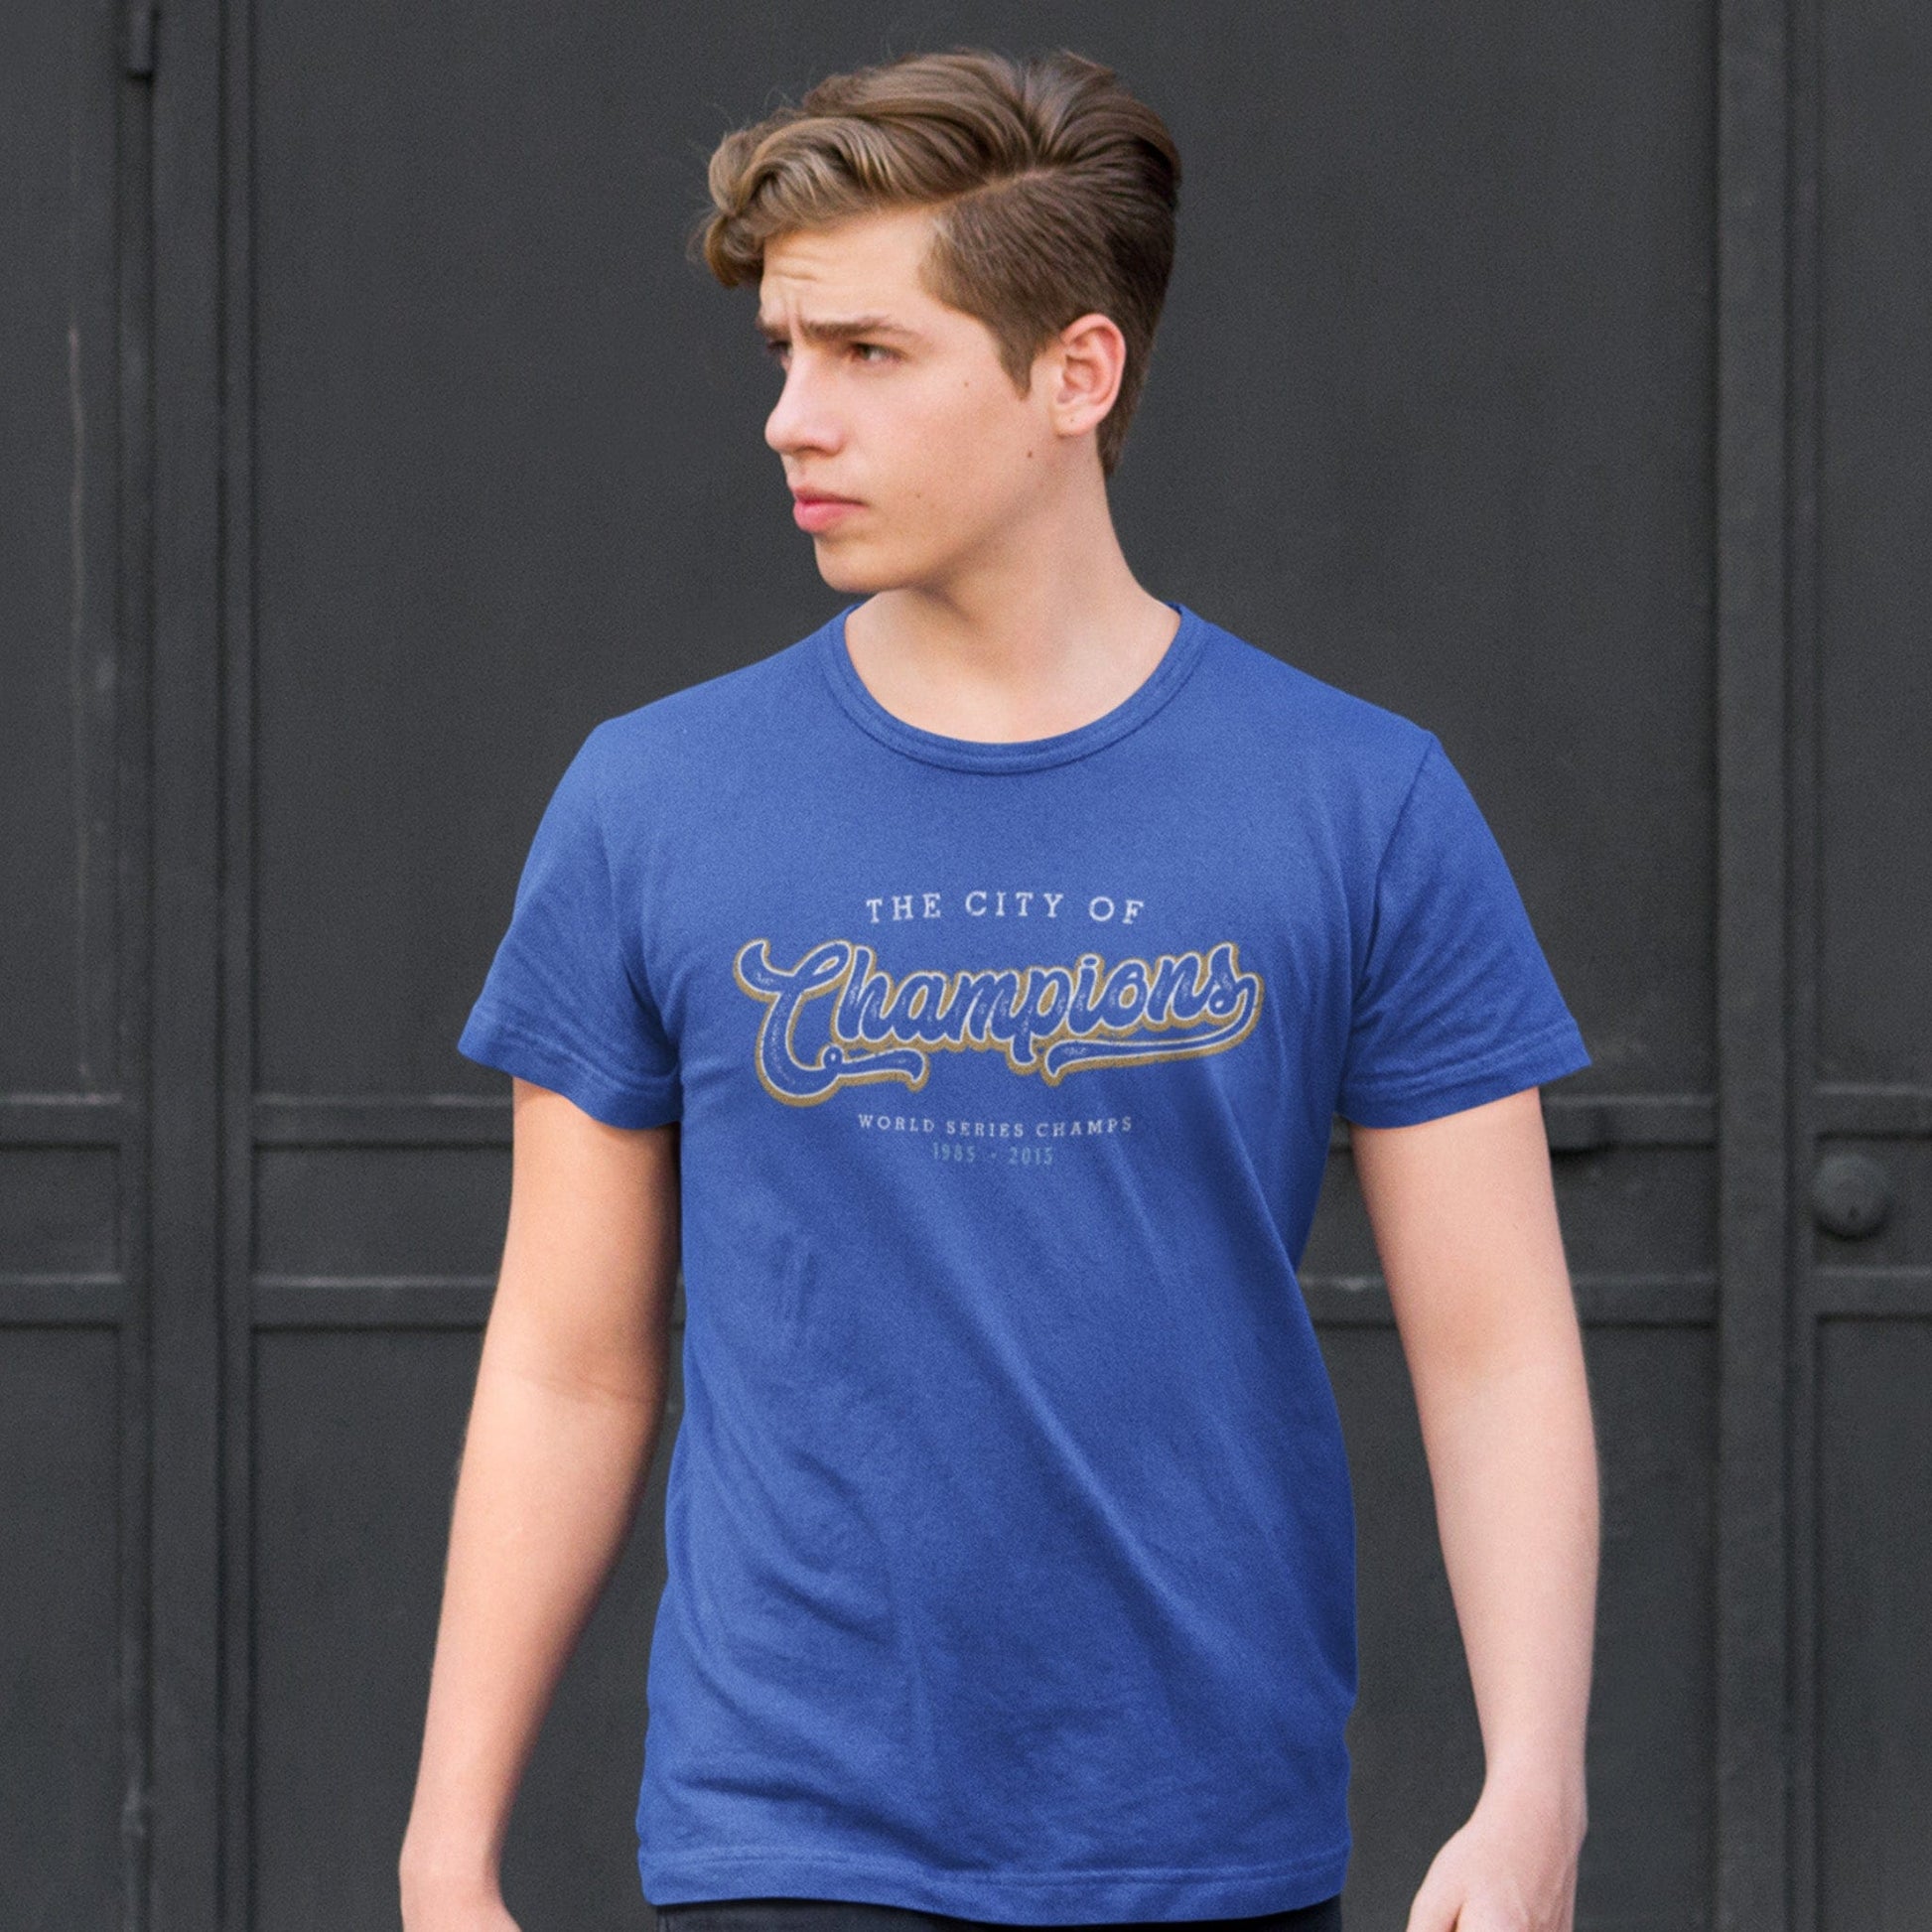 KC Swag Kansas City Royals white/gold CITY OF CHAMPIONS on heather blue t-shirt worn by male model standing in front of large black doors